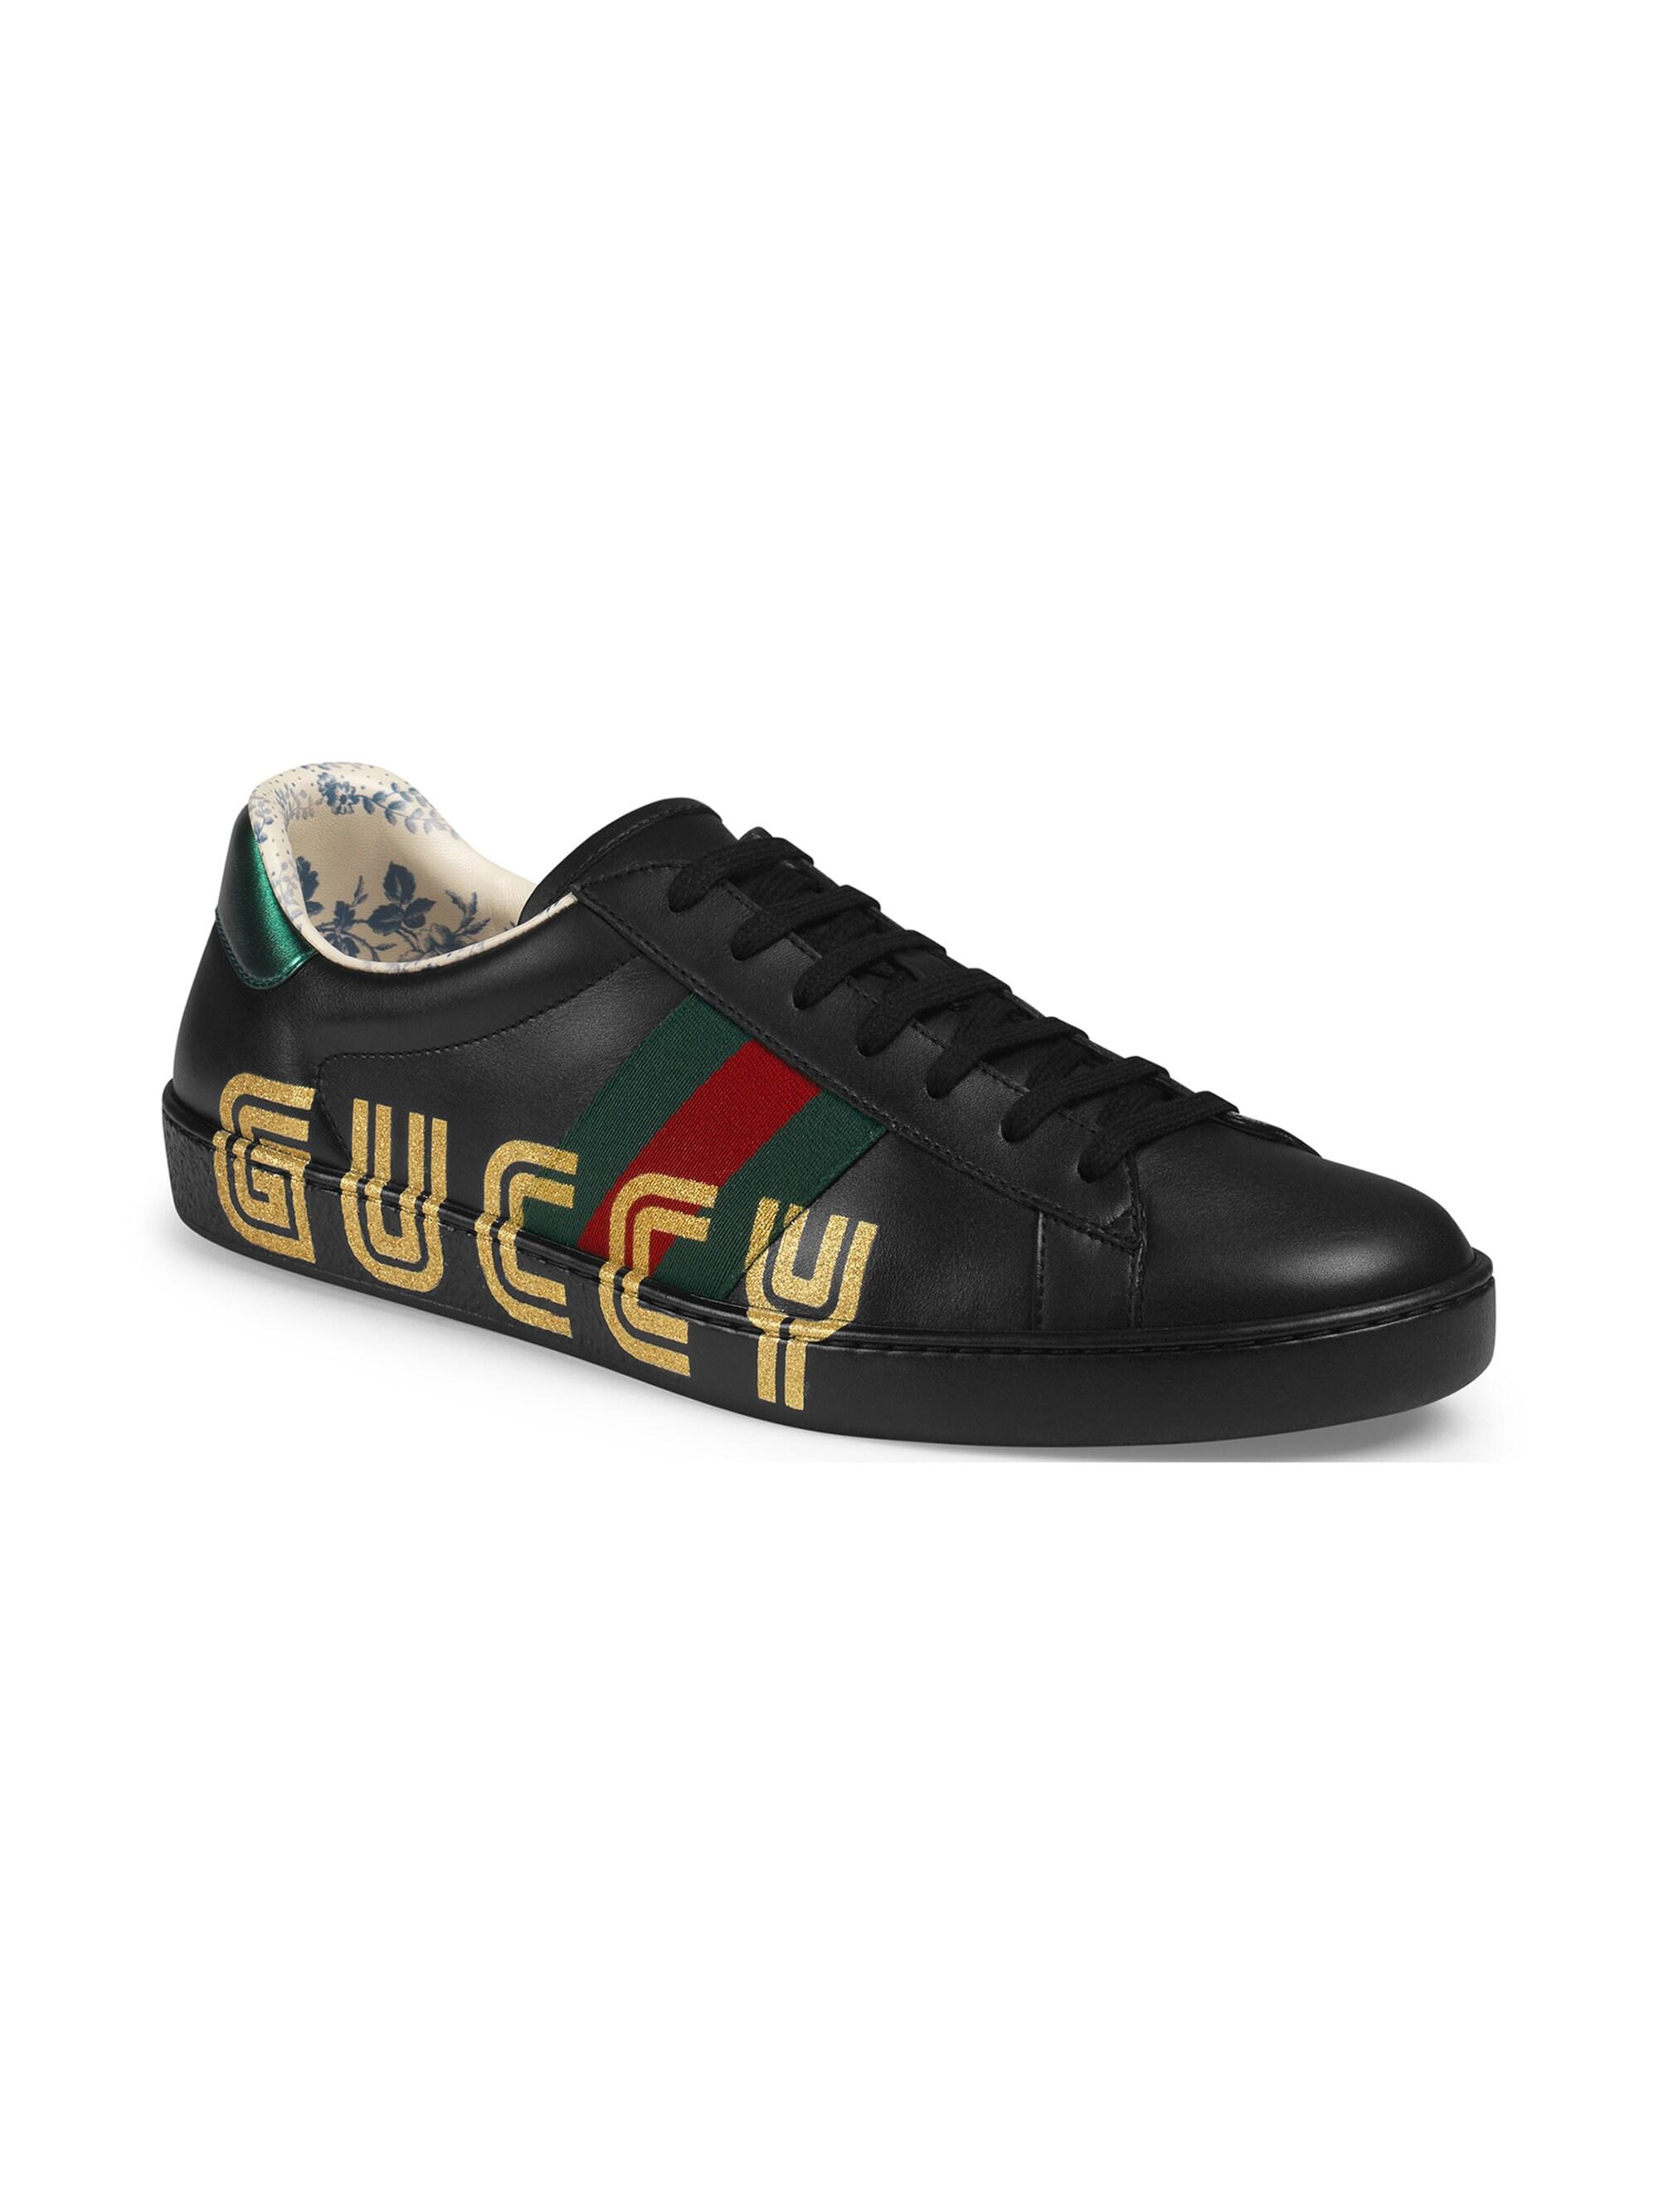 Buy > gucci shoes saks fifth avenue > in stock